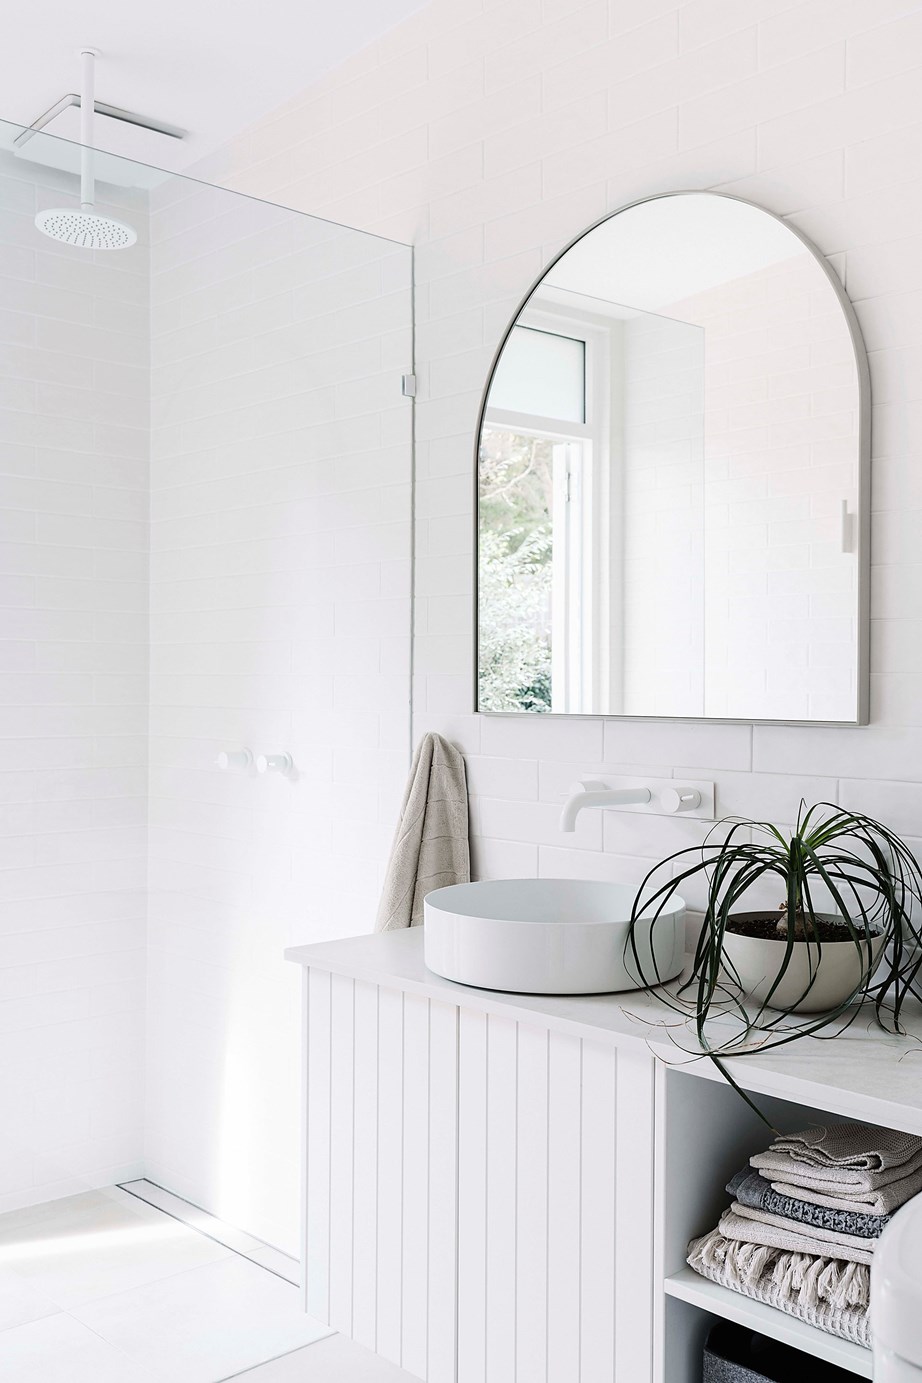 Heated flooring and a door that opens directly onto the backyard make this the perfect bathroom in [this airy beach shack in Flinders](https://www.homestolove.com.au/renovated-mid-century-modern-beach-shack-flinders-22501|target="_blank"), VIC. *Photo: Marnie Hawson / Story: Country Style*